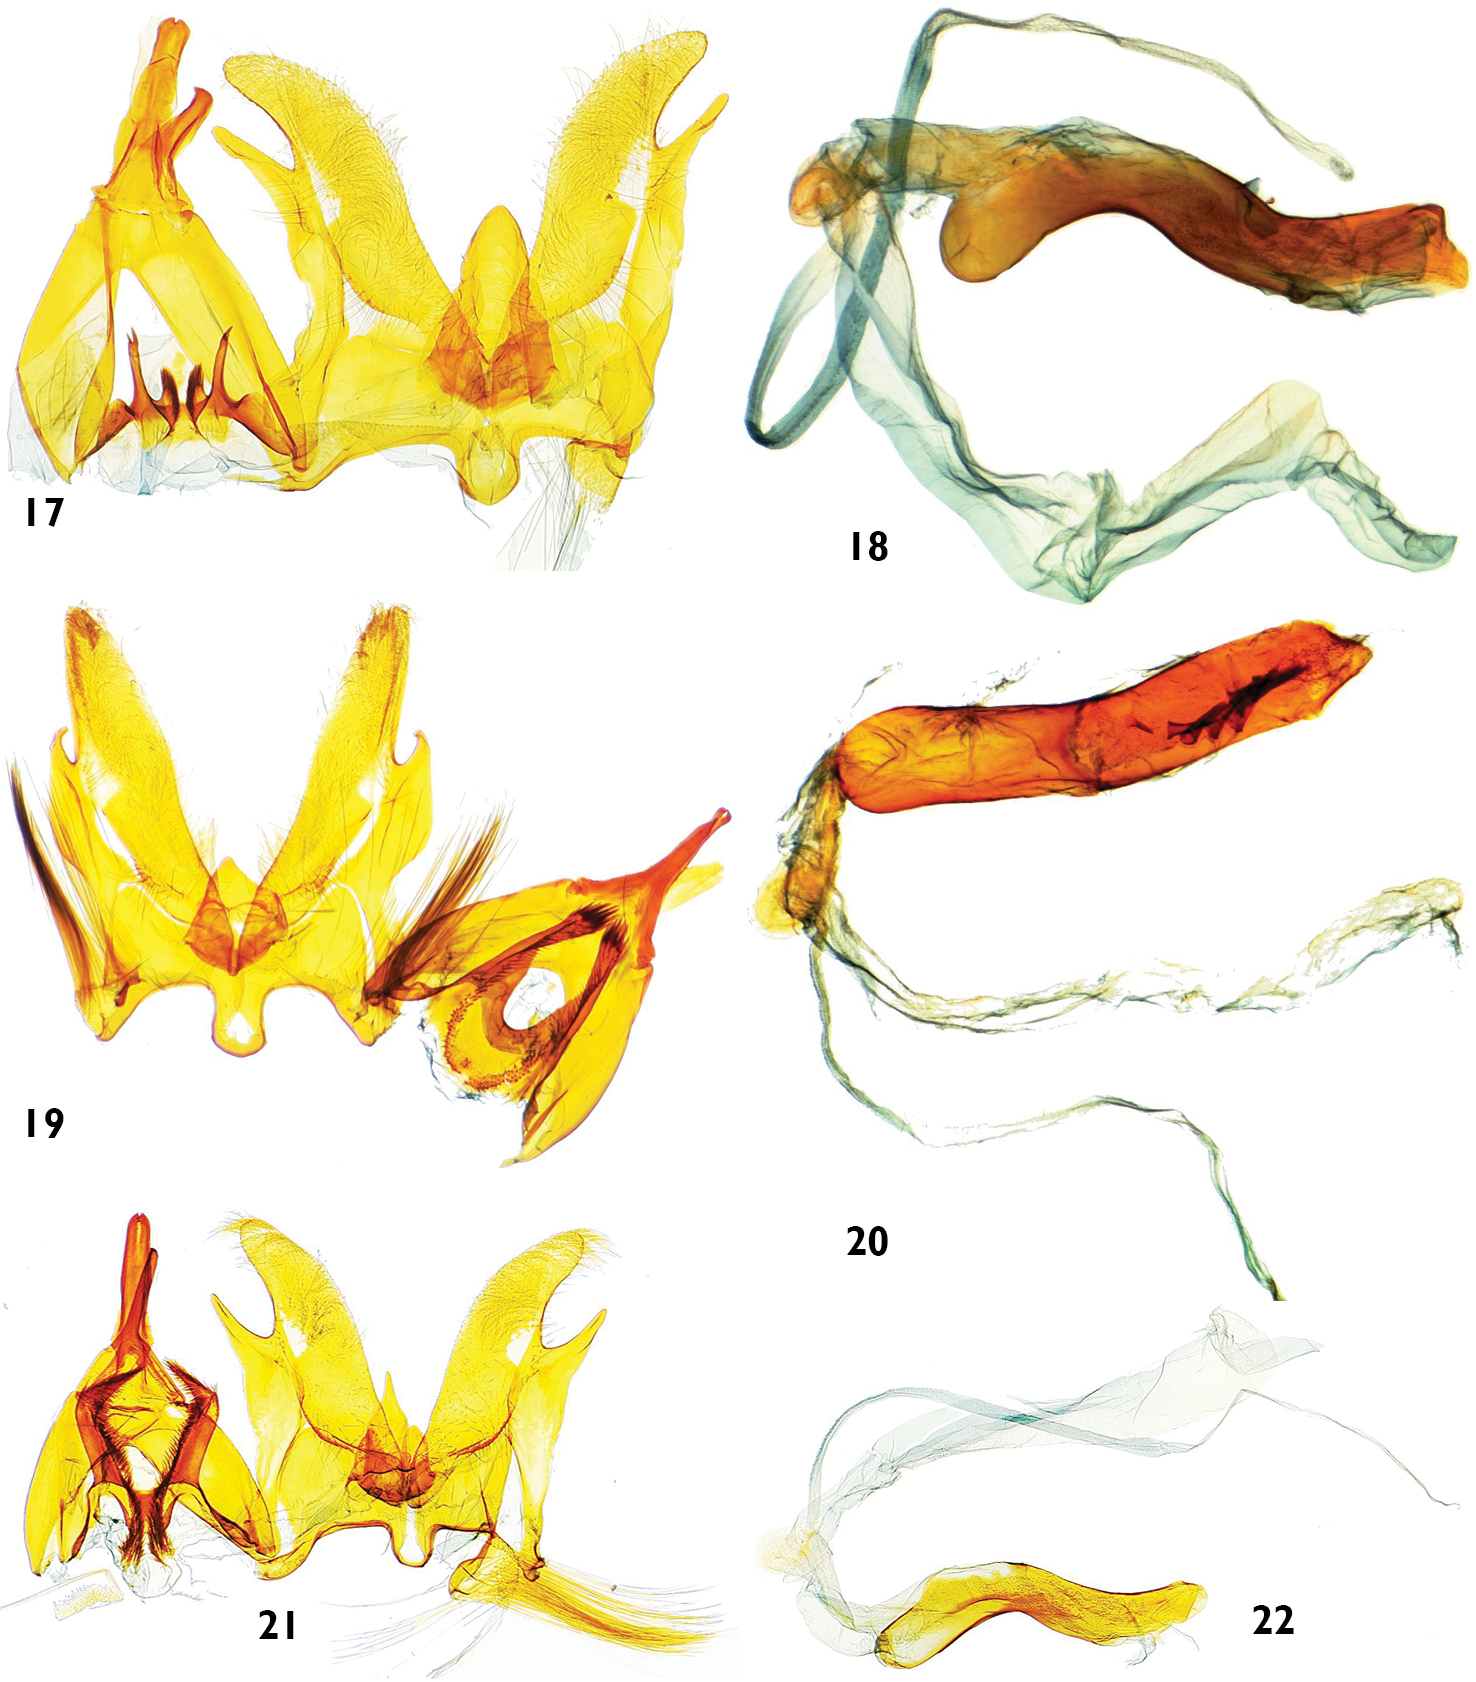 Systematics of the Neotropical genus Catharylla Zeller.